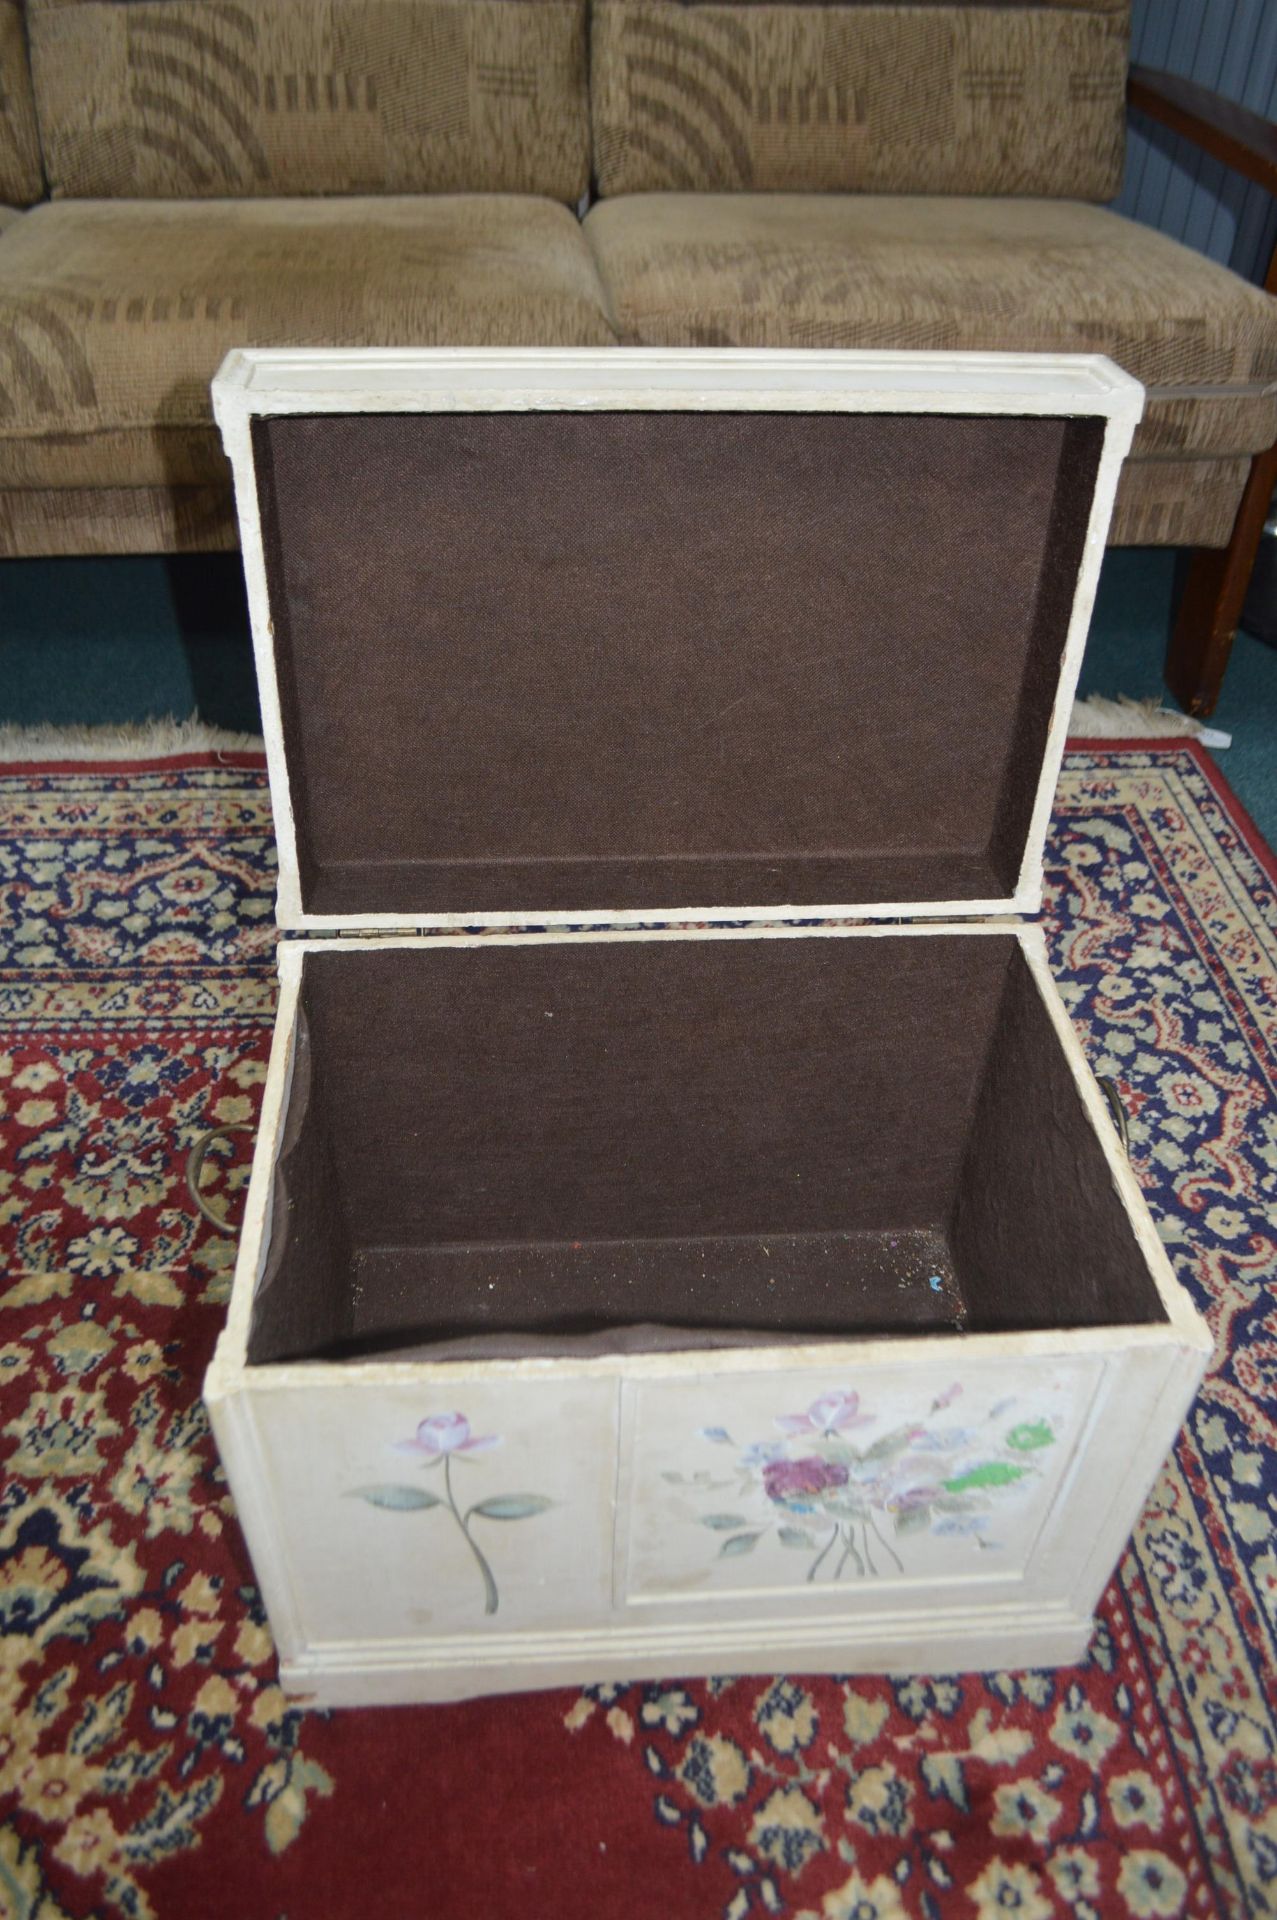 Hand Painted Floral Storage Box - Image 2 of 2